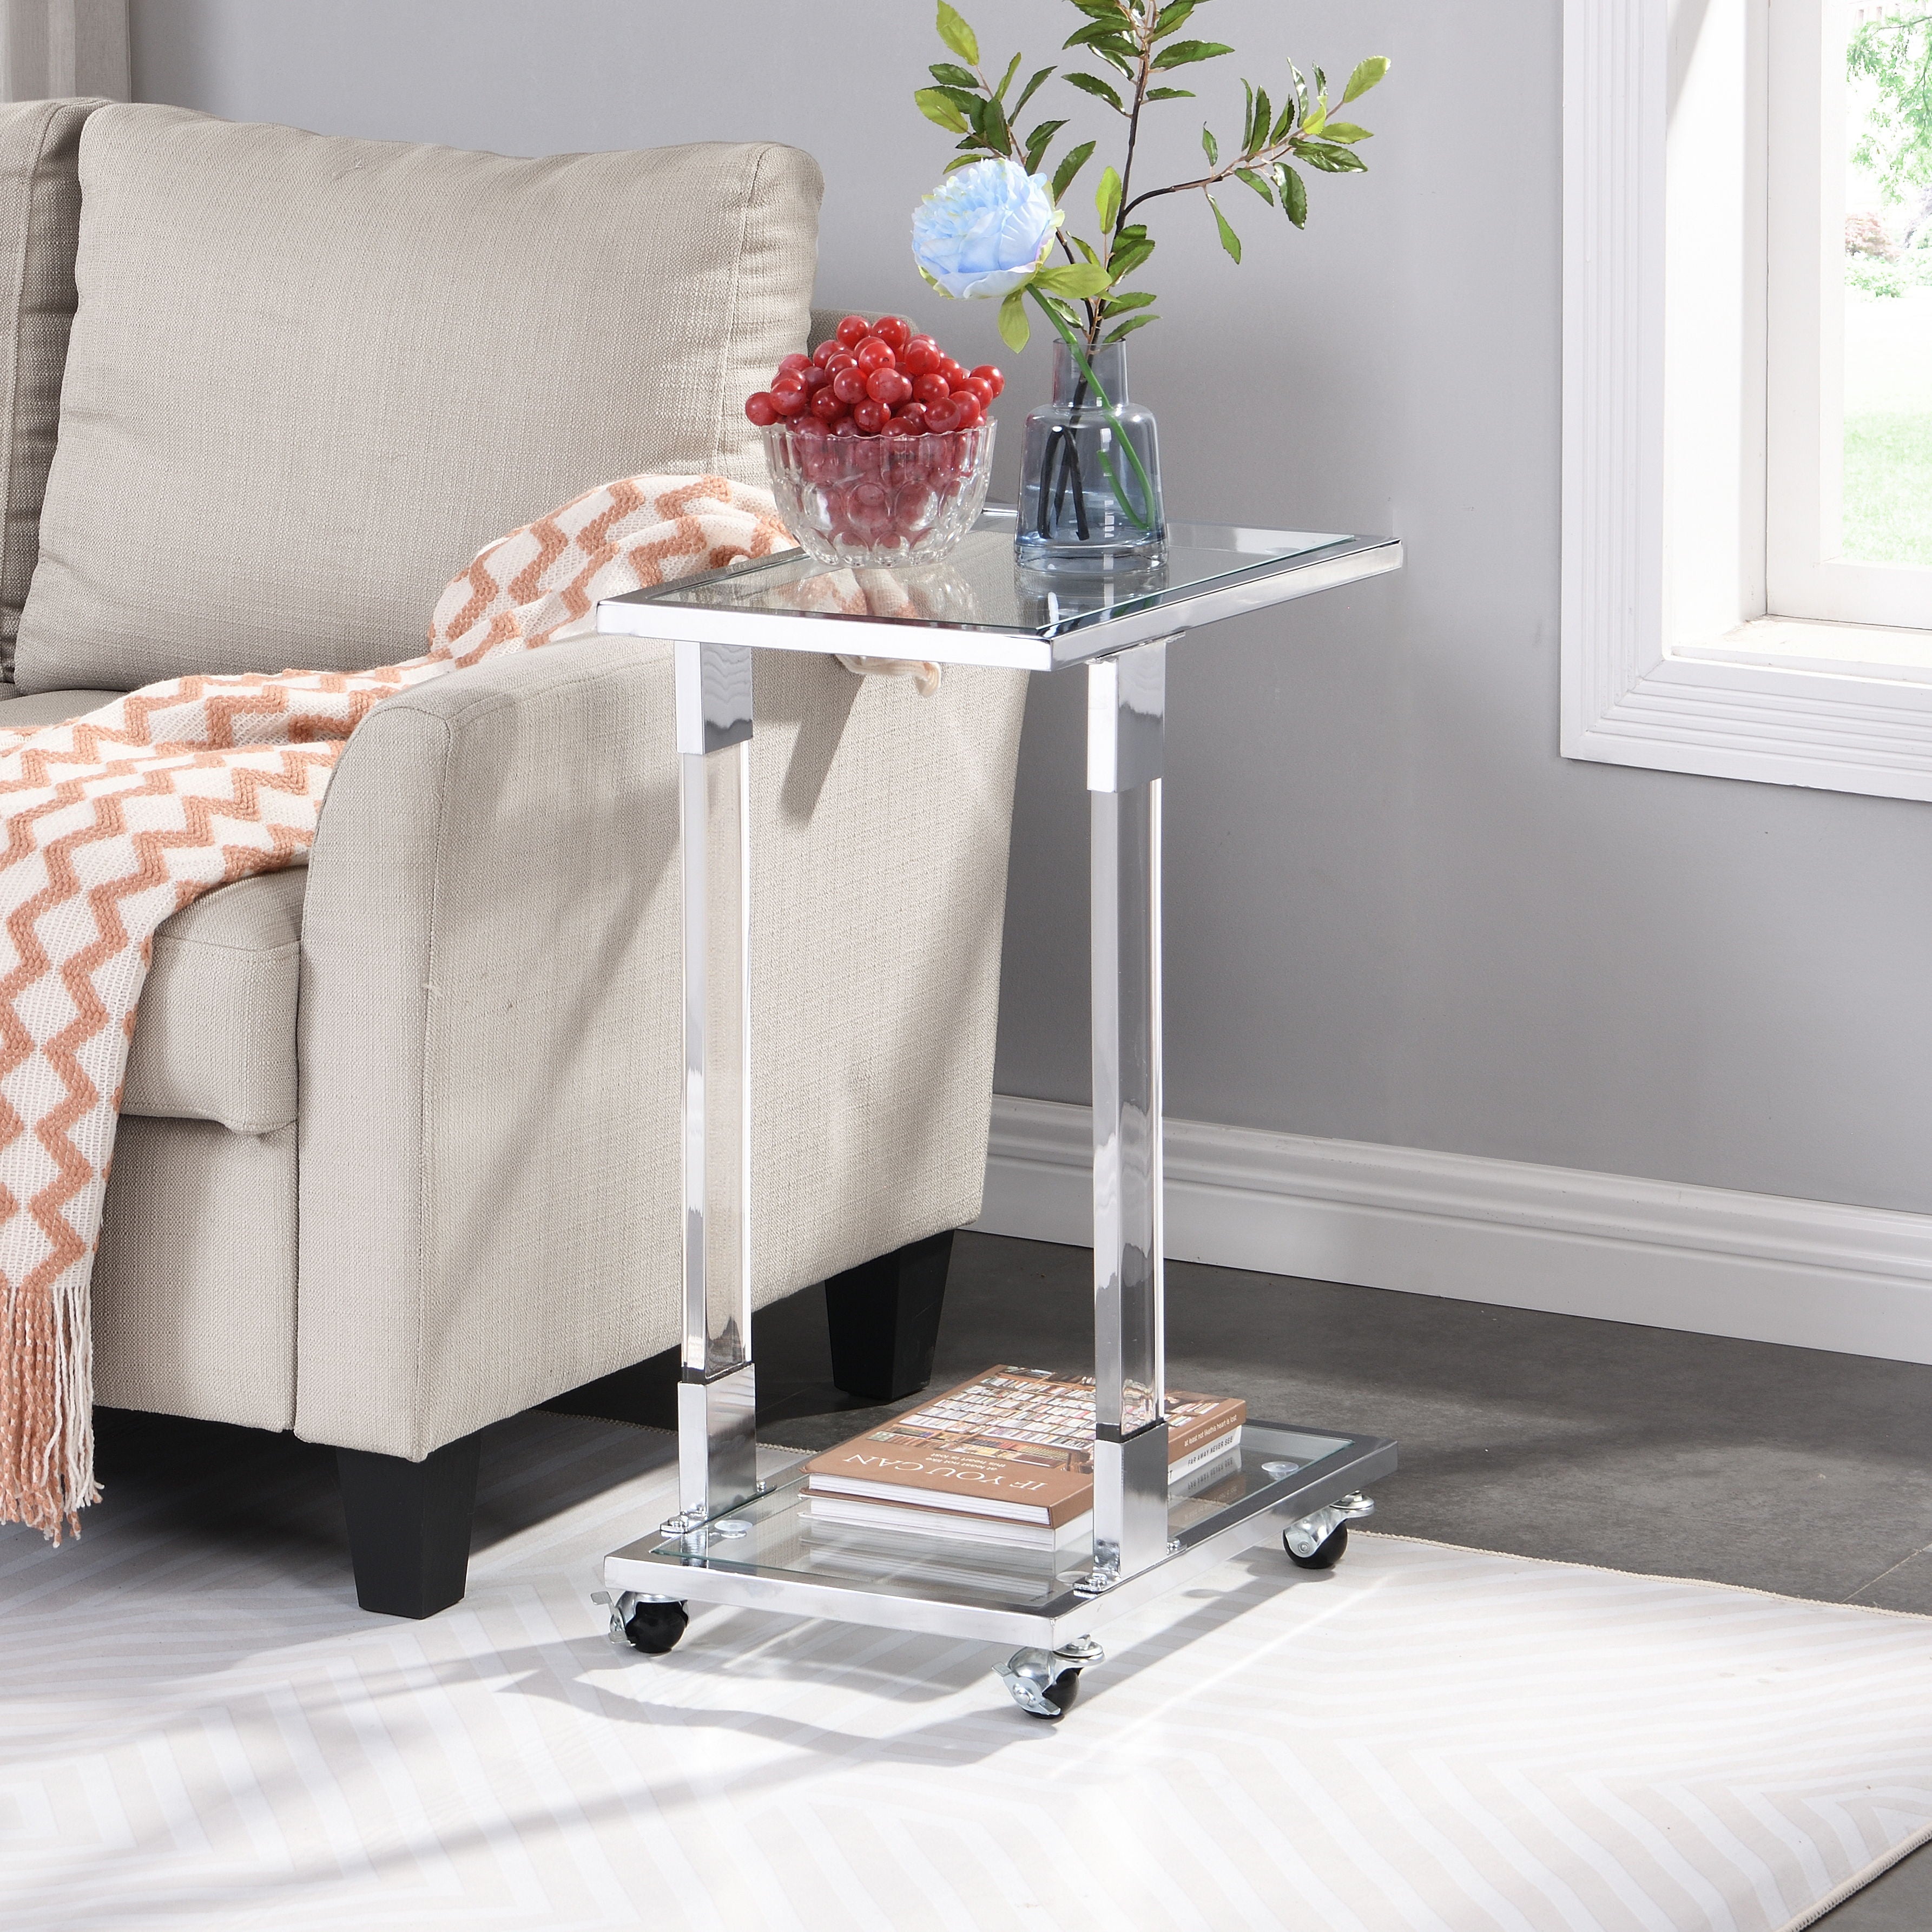 Chrome Glass Side Table, Acrylic End Table, Glass Top C Shape Square Table With Metal Base For Living Room, Bedroom, Balcony Home And Office